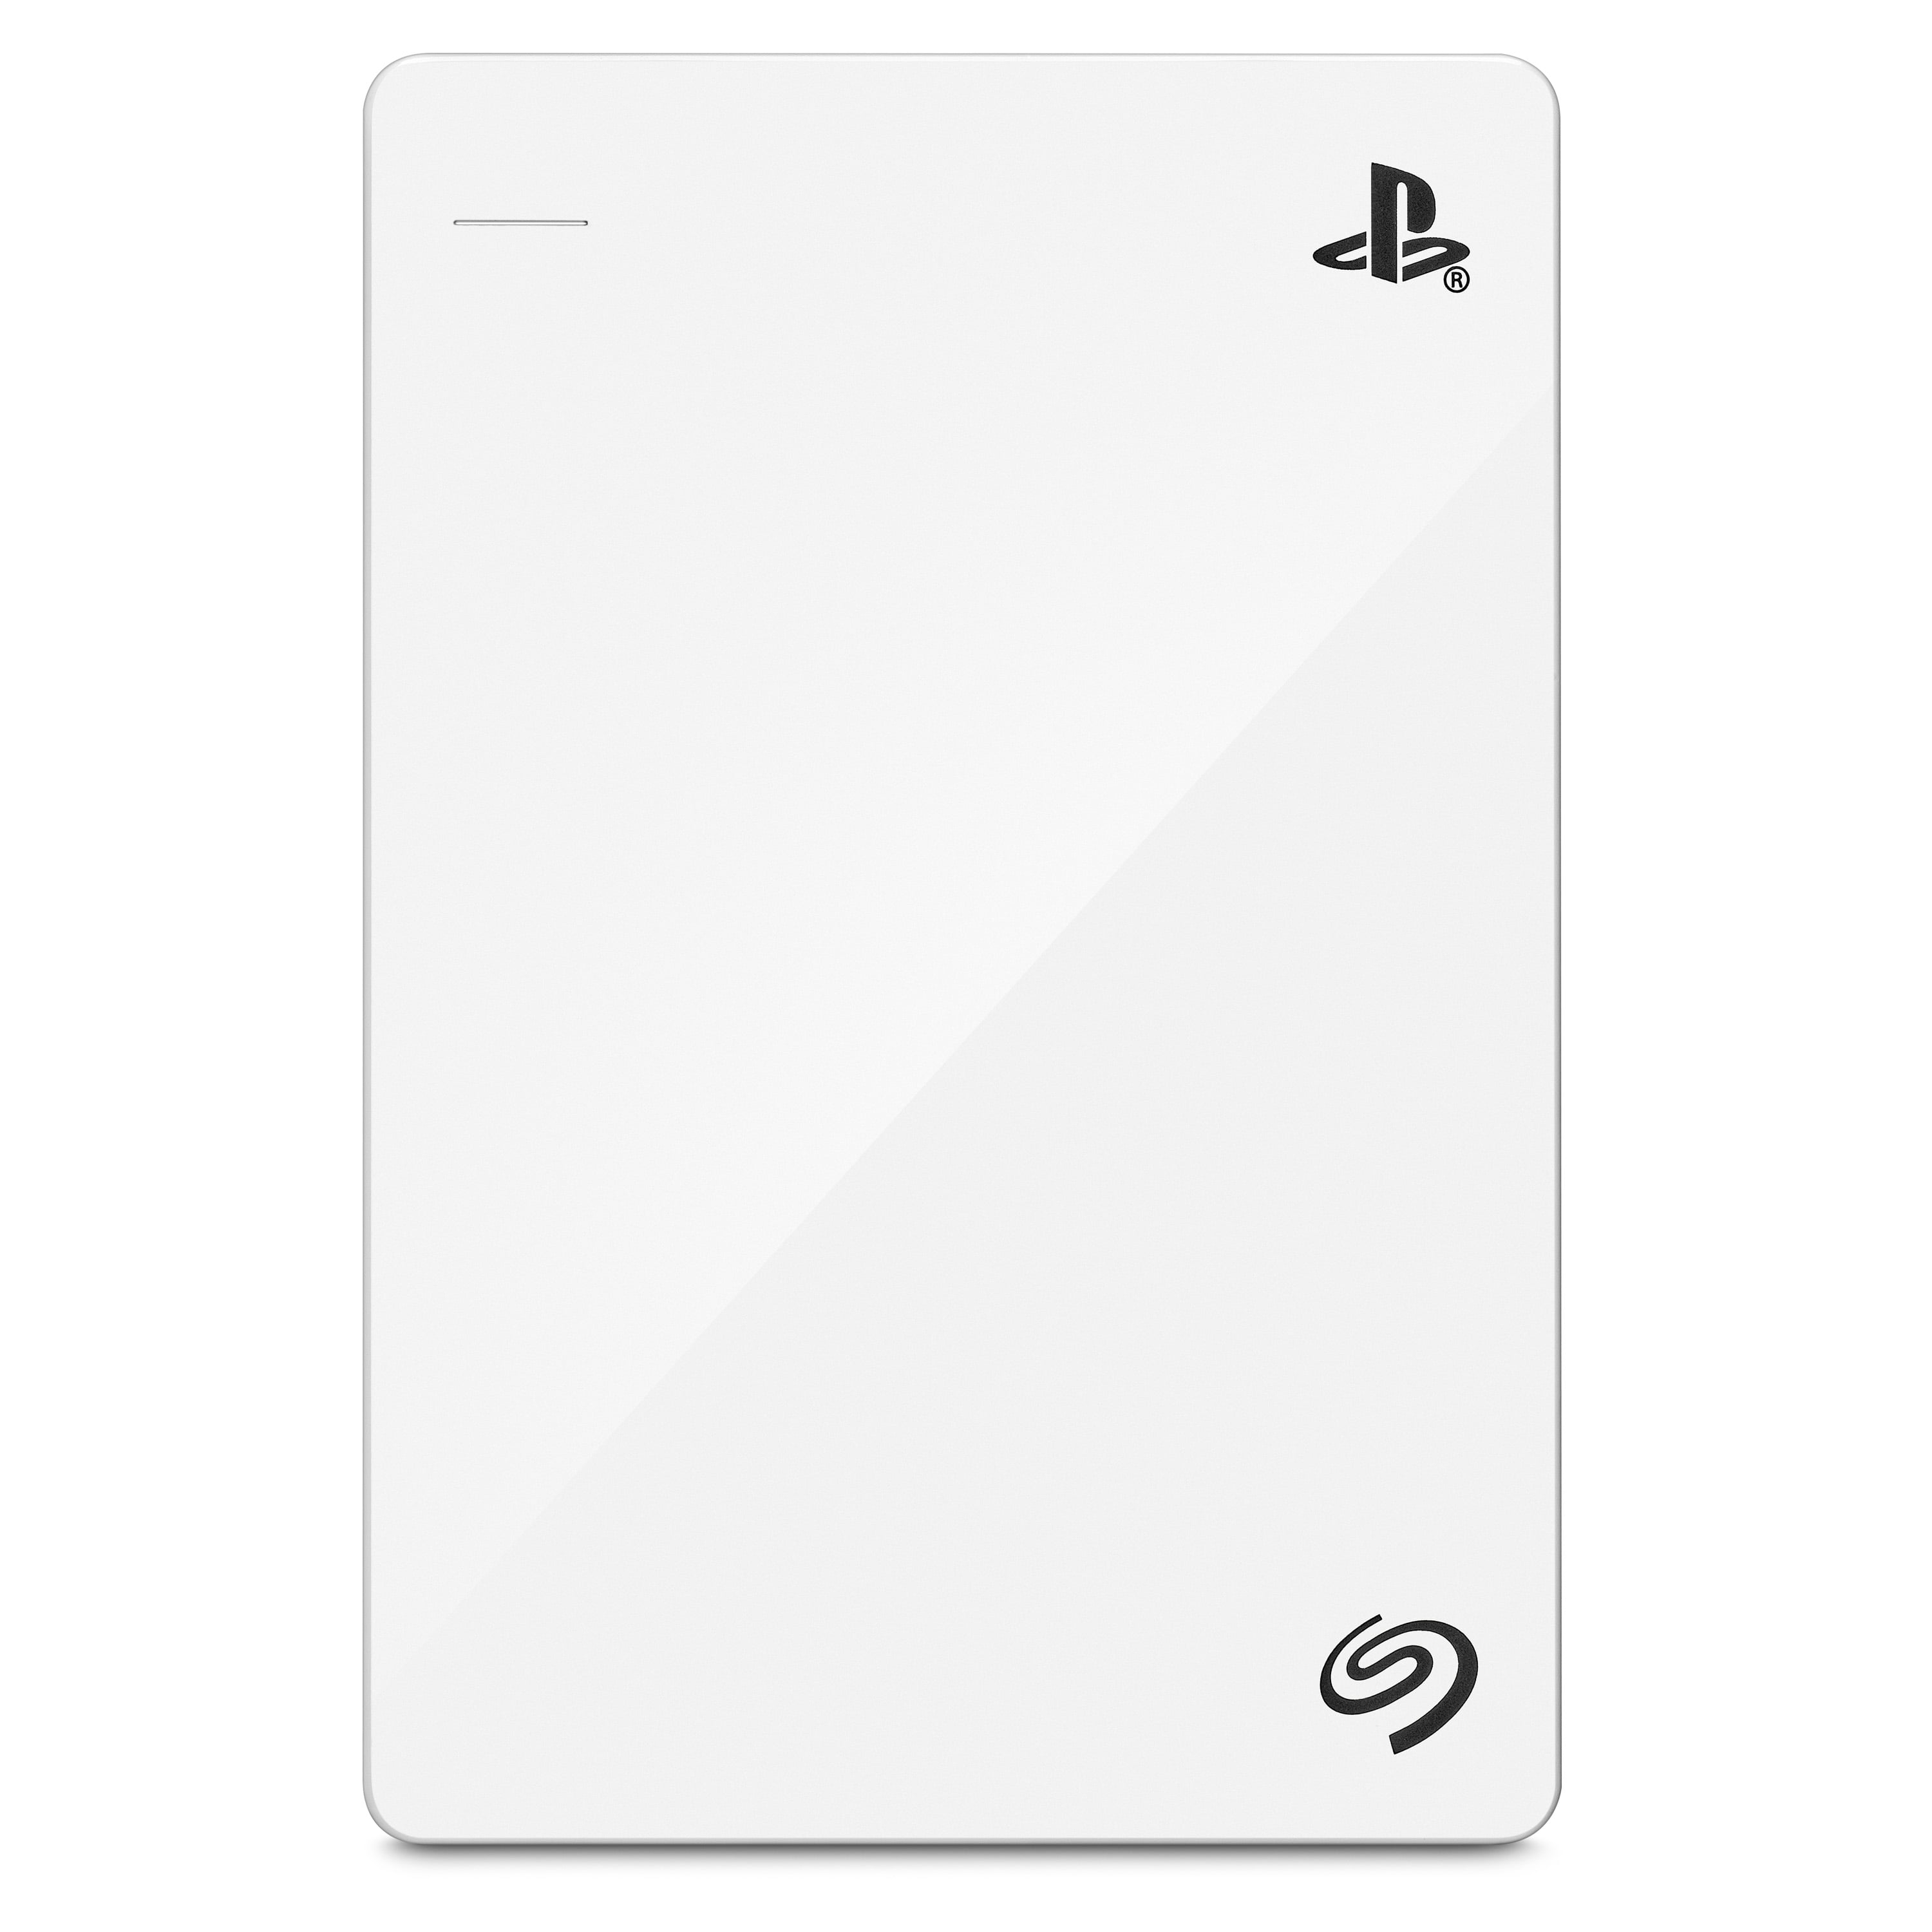 Officially White Drive Portable Hard Game 3.0 Drive Seagate External for - 2TB PlayStation Licensed Consoles USB